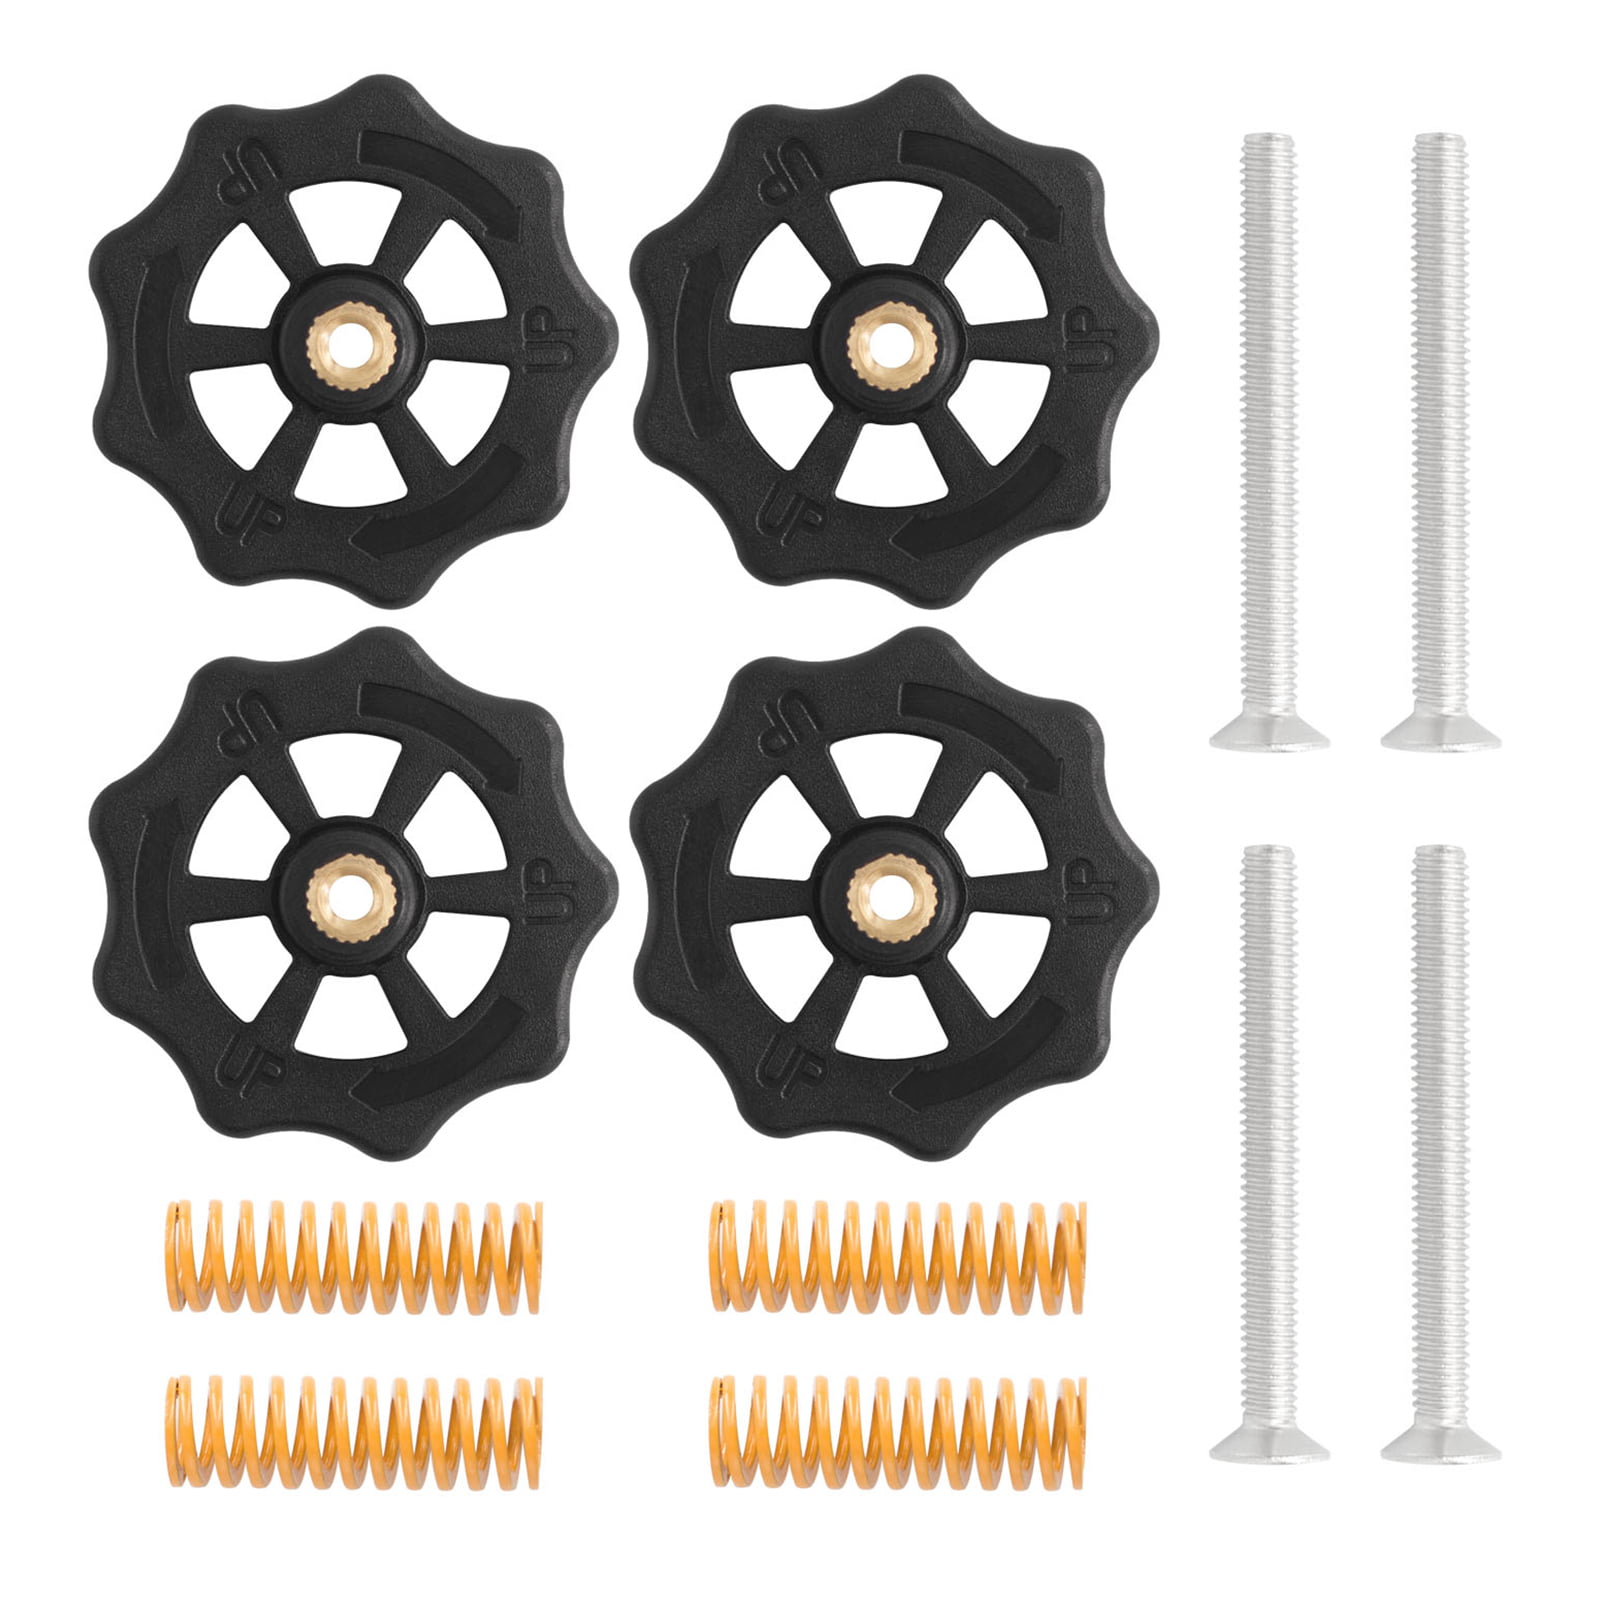 4x New Upgraded Flat Bed Springs for 3D Printer Creality 3D CR-10,CR-10S,CR-10 